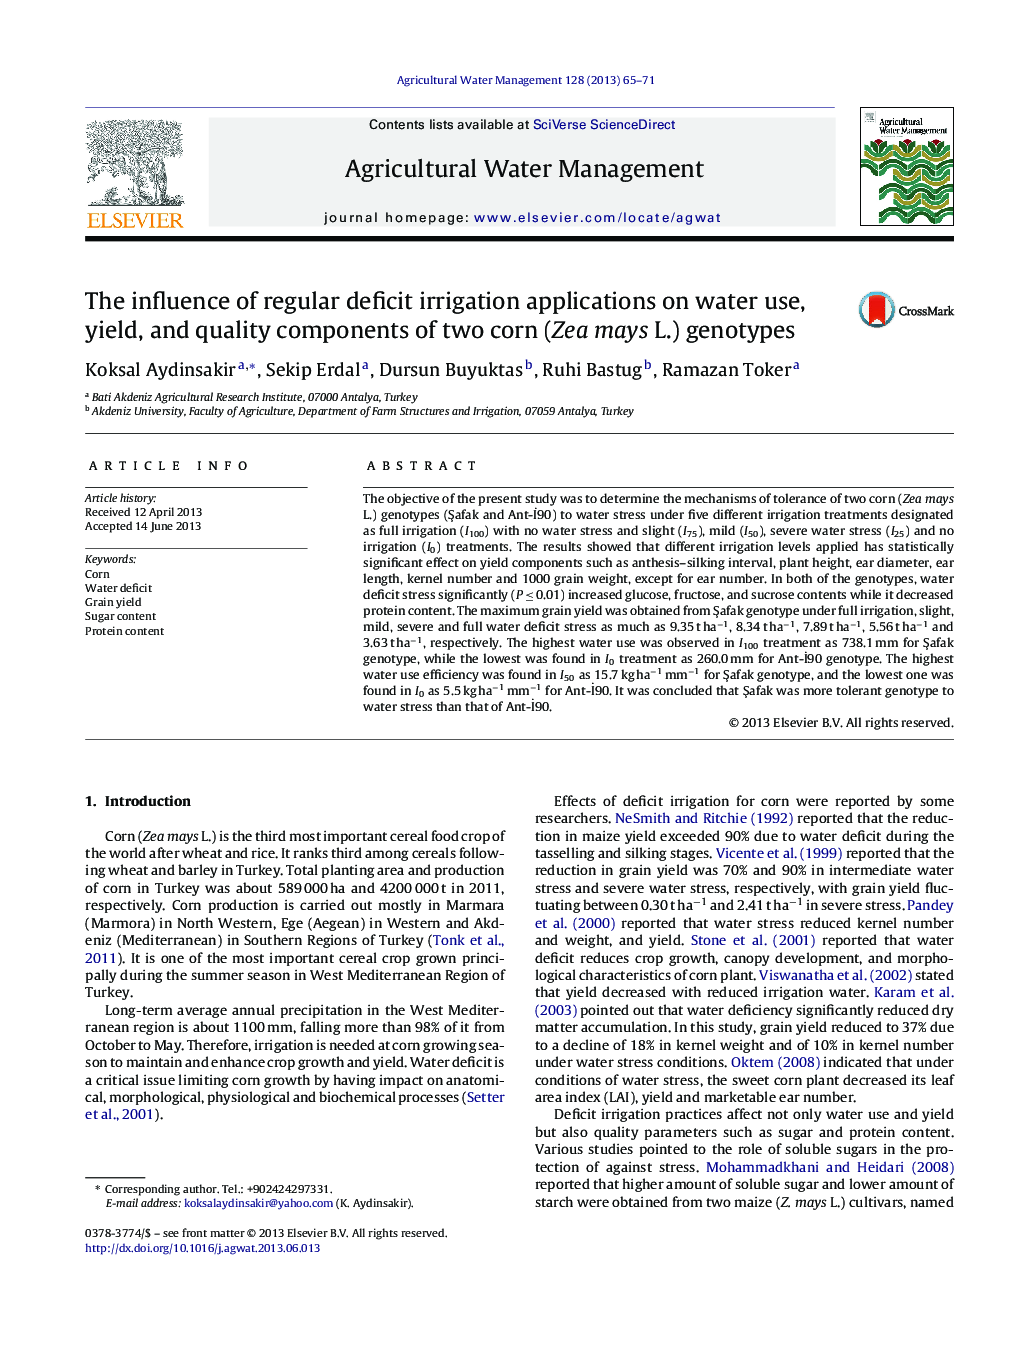 The influence of regular deficit irrigation applications on water use, yield, and quality components of two corn (Zea mays L.) genotypes